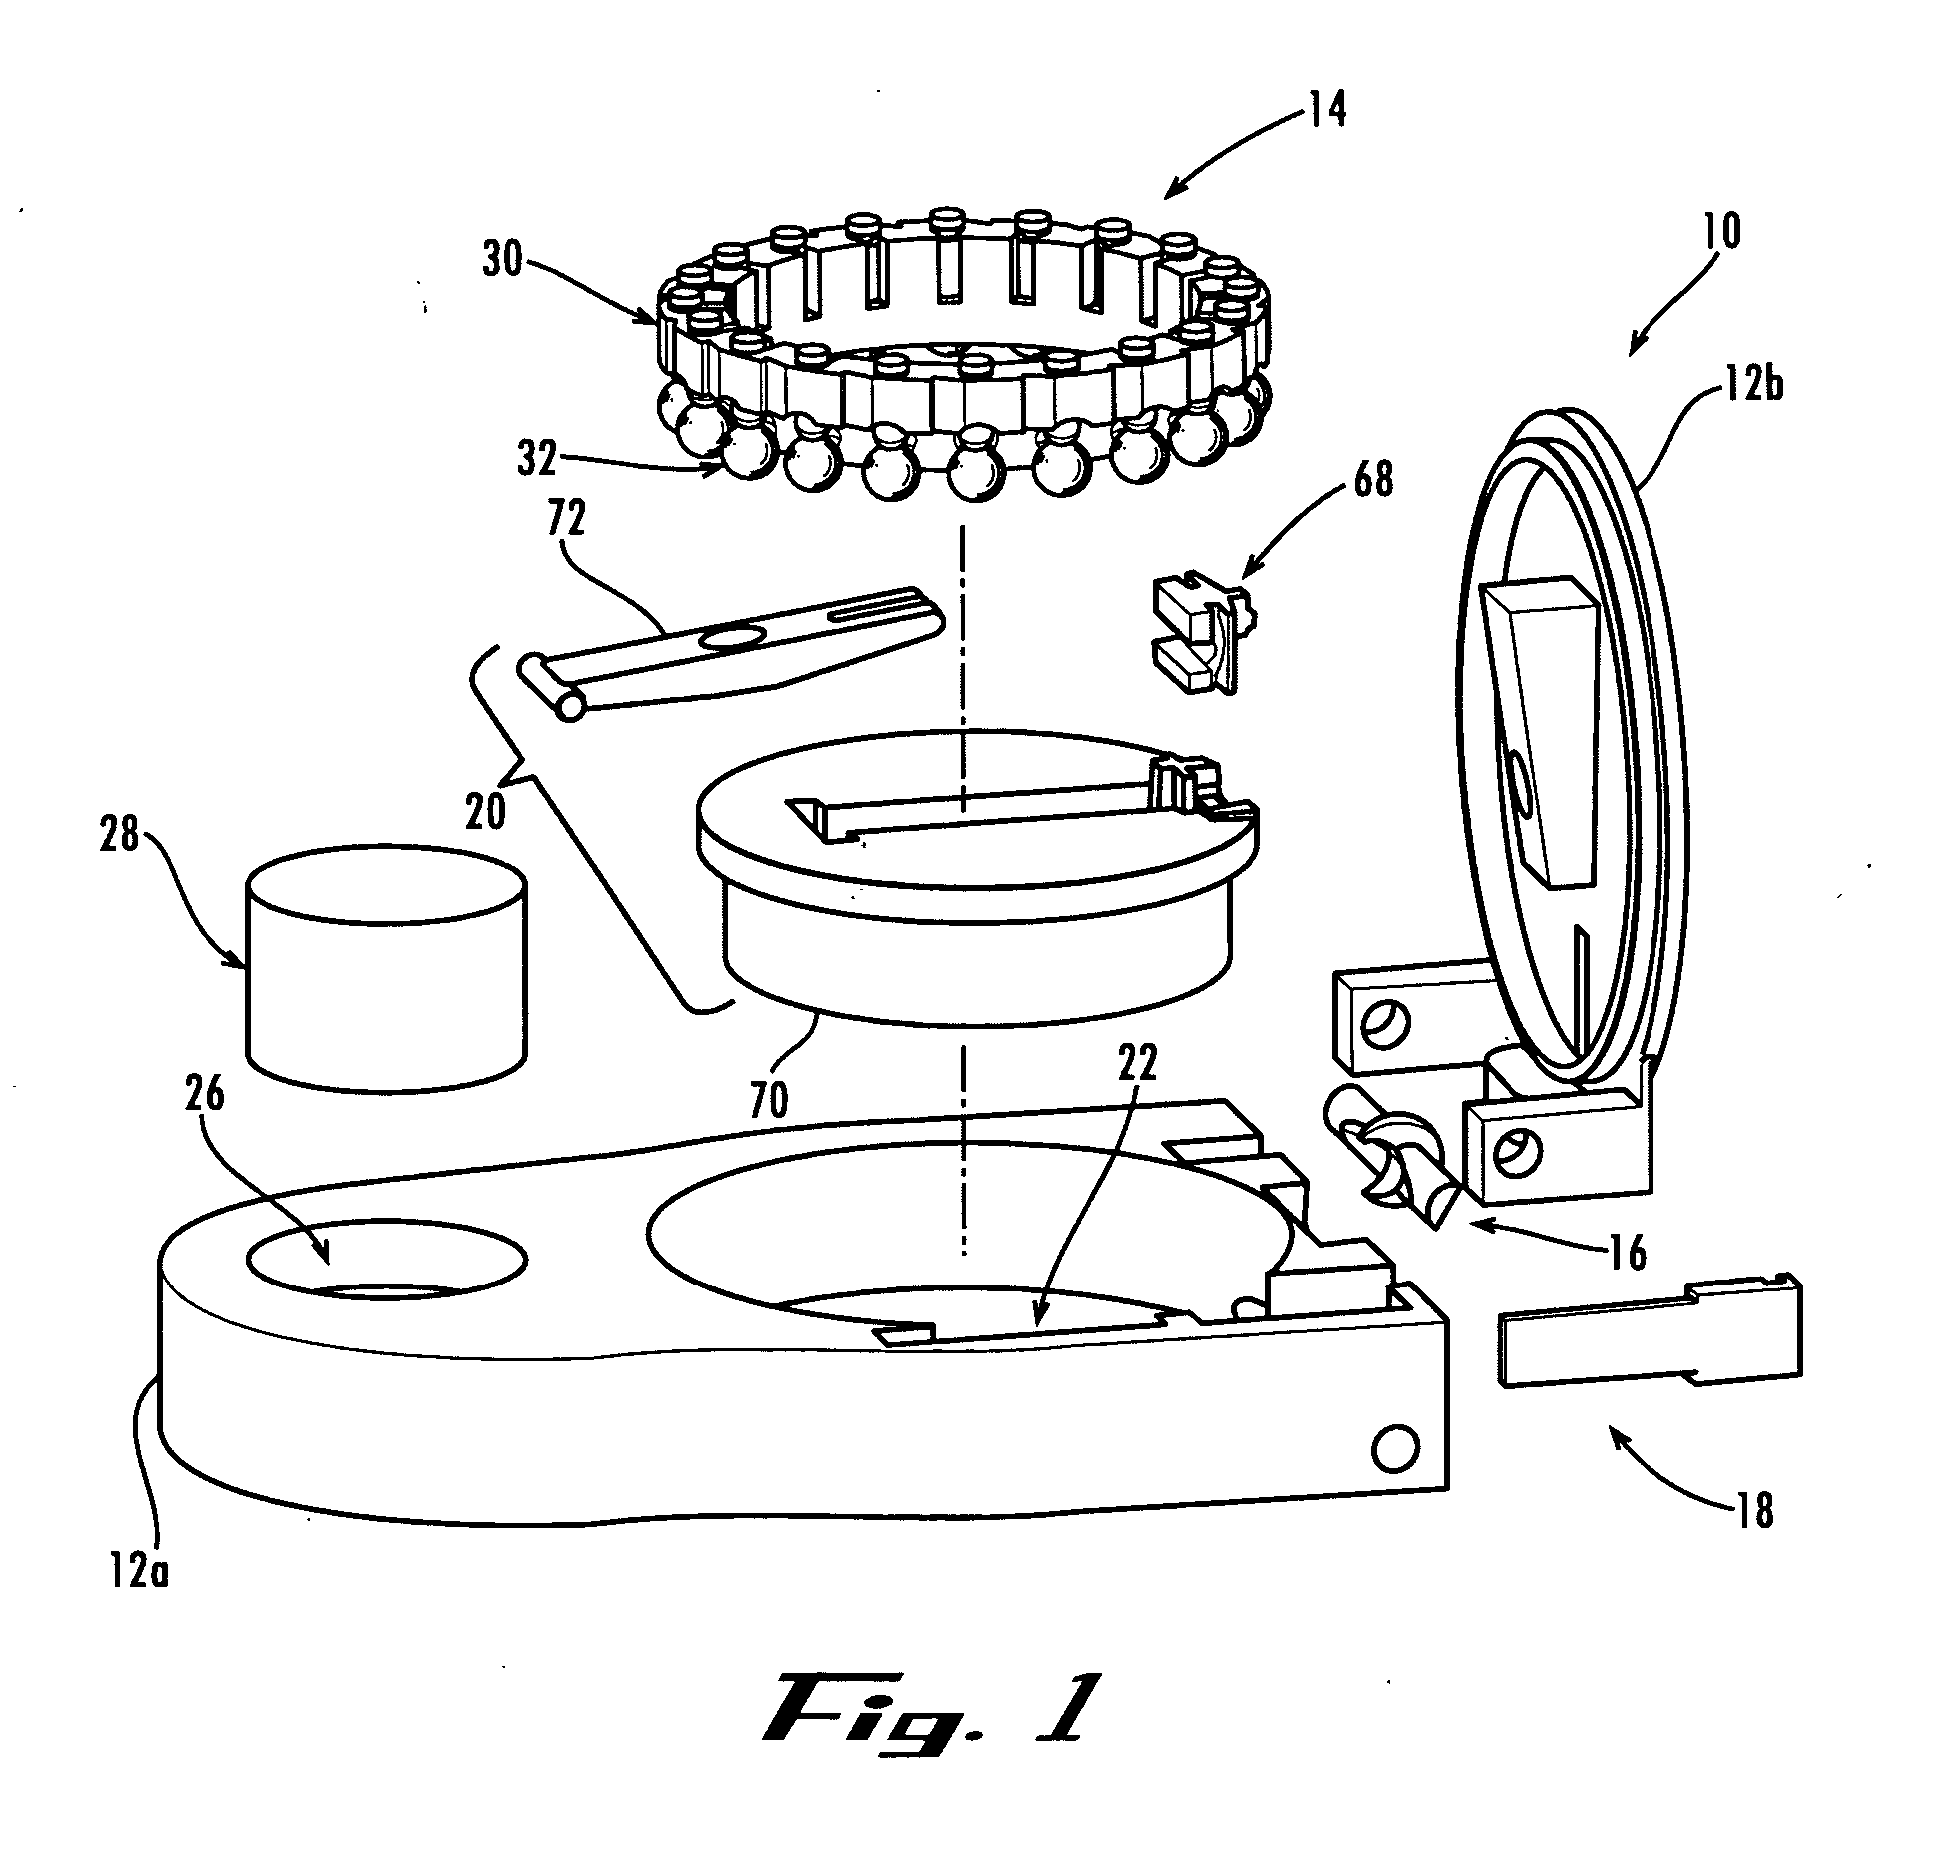 Multi-lancet device with sterility cap repositioning mechanism